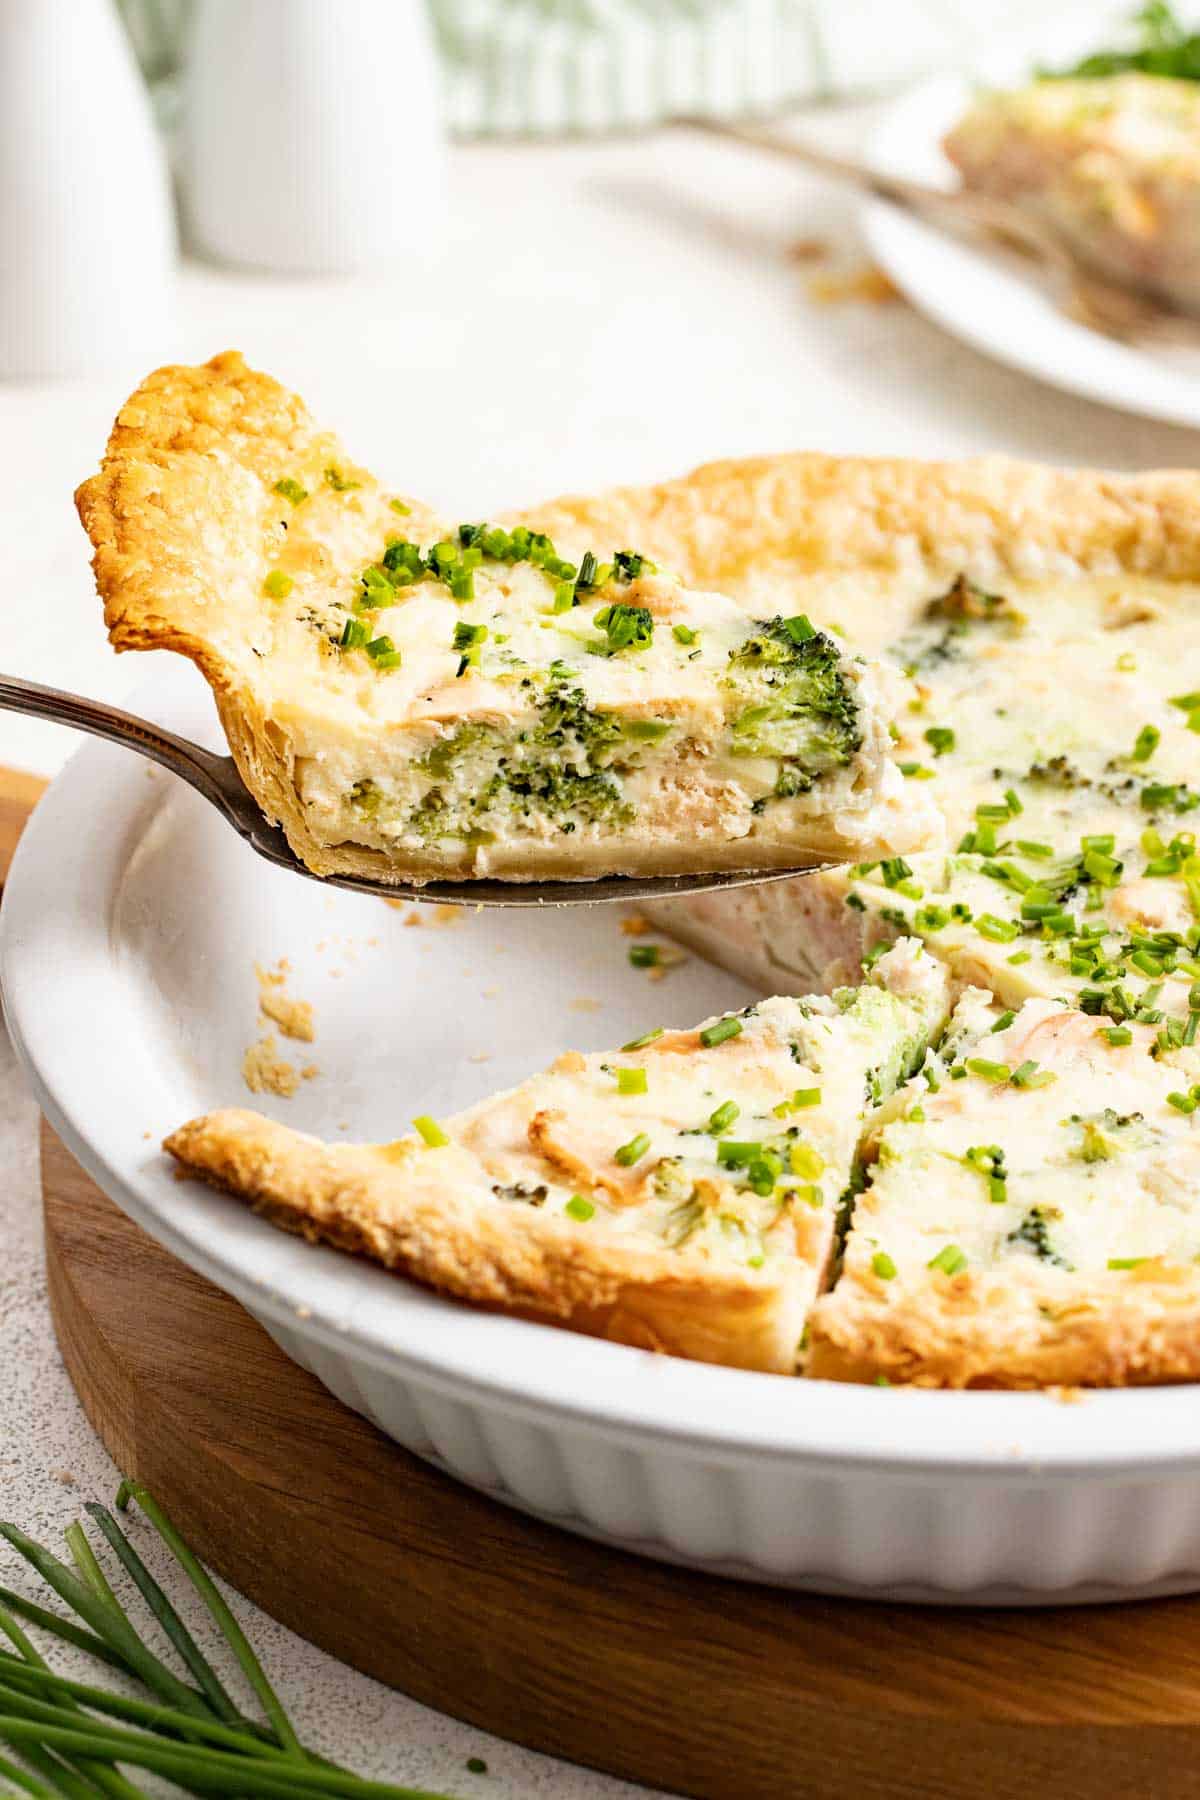 A serving utensil lifting a slice of broccoli quiche out of the pie plate.